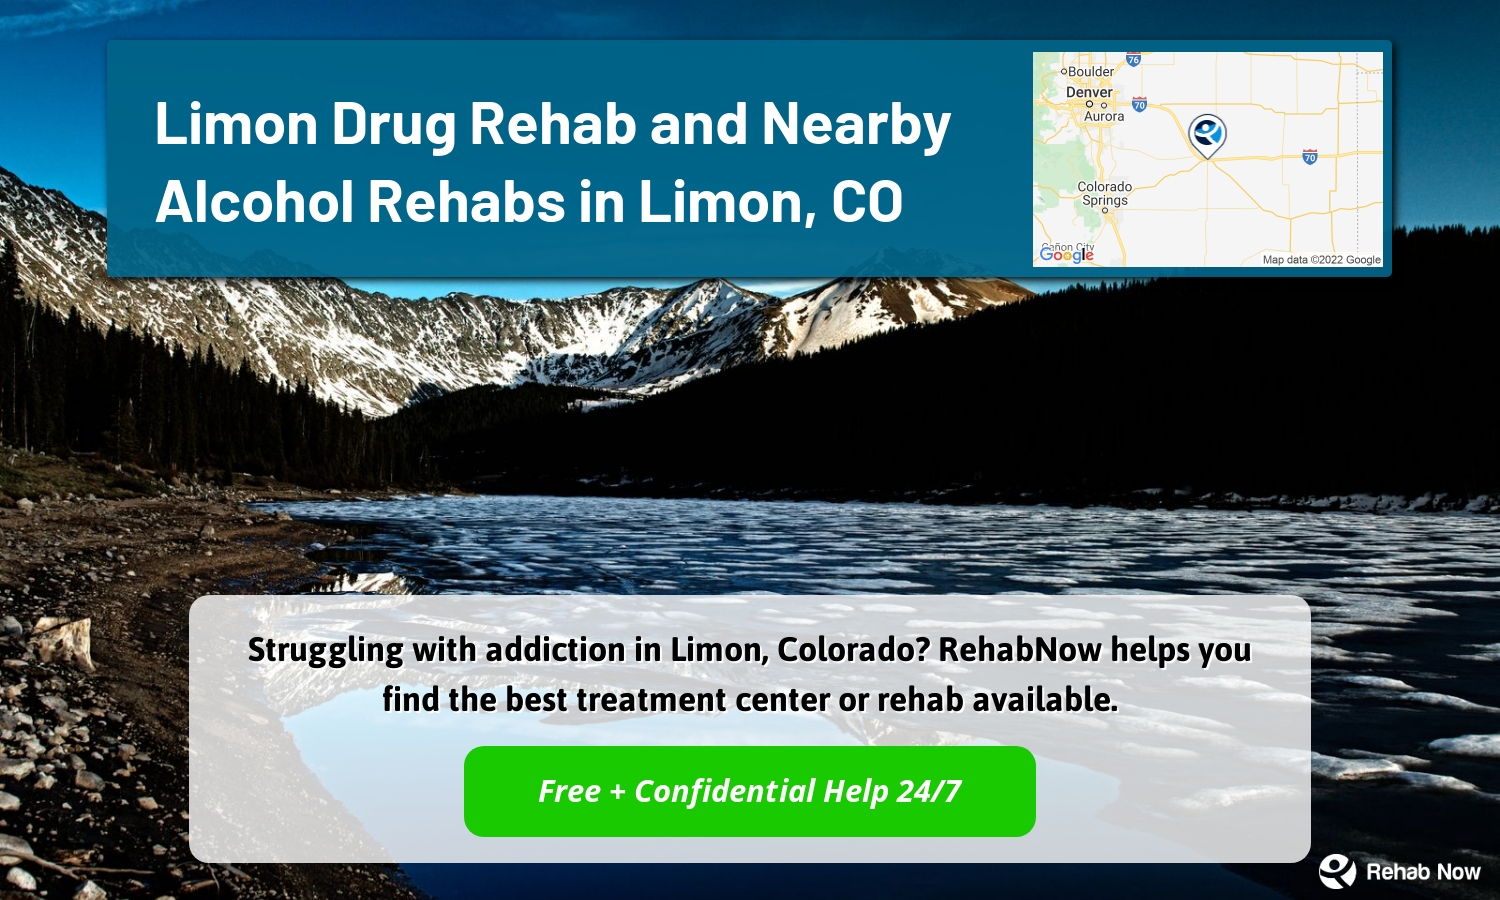 Struggling with addiction in Limon, Colorado? RehabNow helps you find the best treatment center or rehab available.